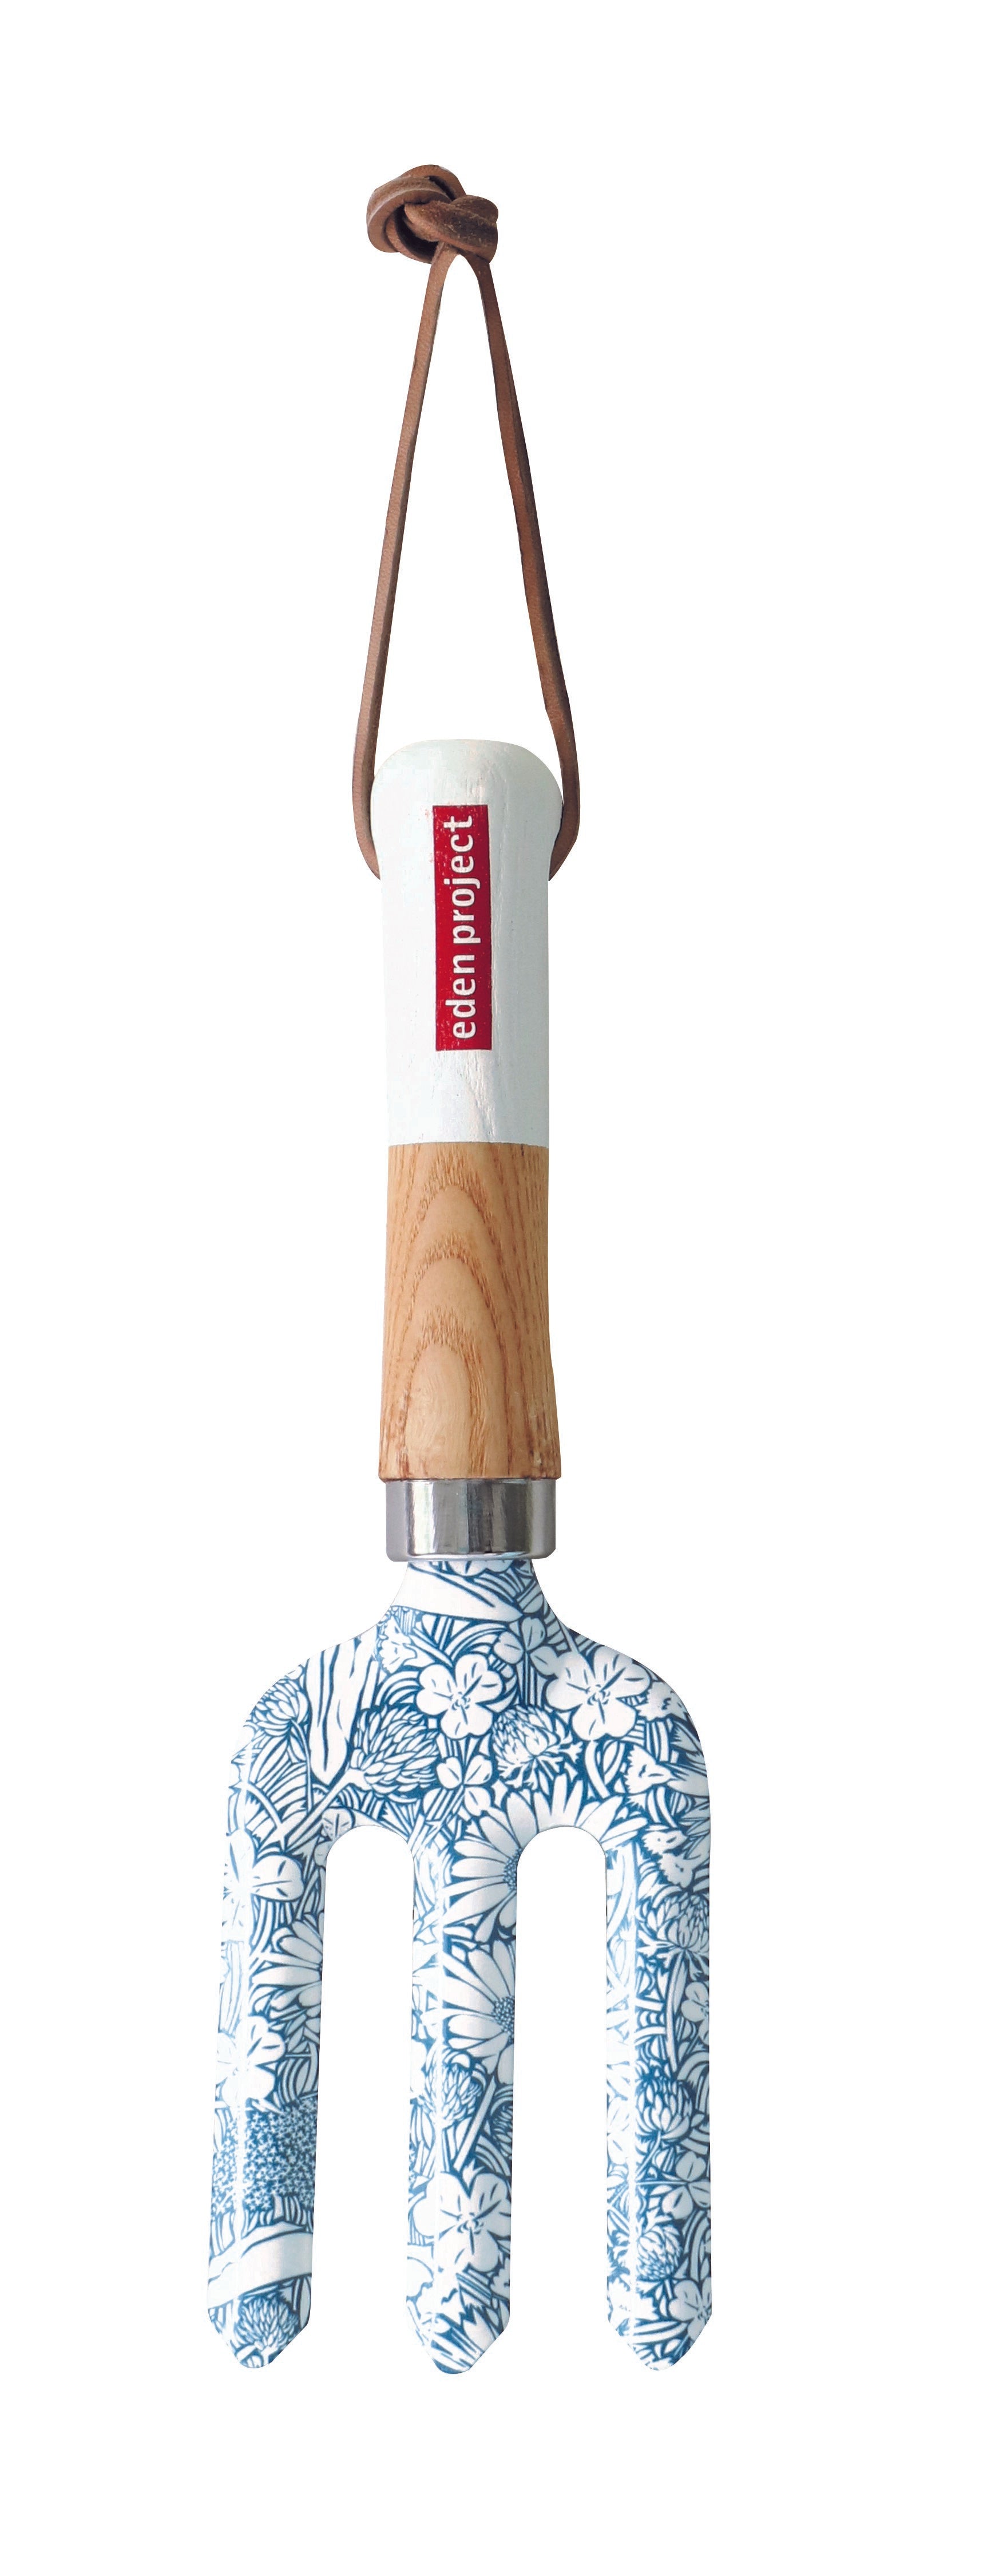 Eden Project Trowel and Fork